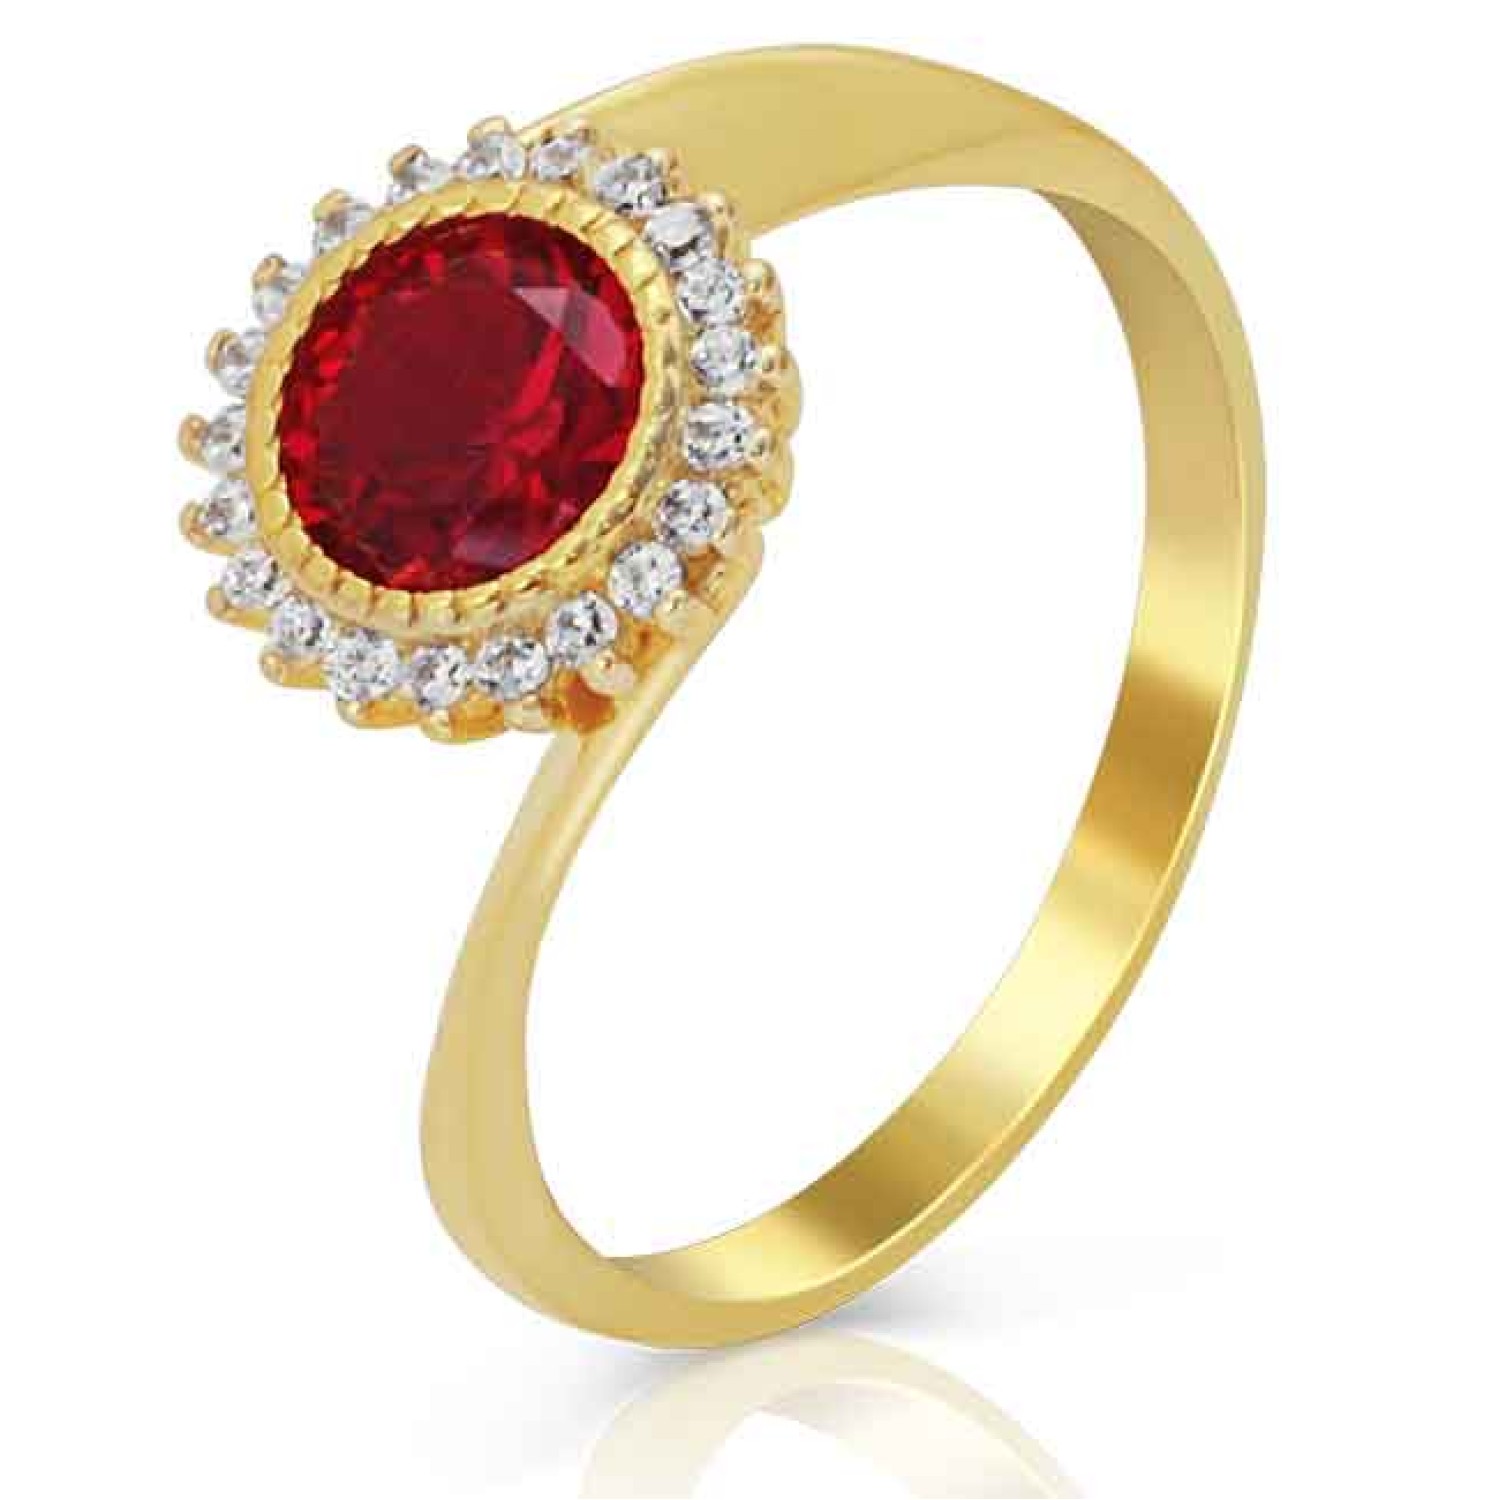 9ct Yellow Gold and Ruby Coloured Cubic Zirconia Ring. 9ct Yellow Gold and Ruby Coloured Cubic Zirconia Ring 9ct Gold OXIPAY - Have it now and pay over 4 fortnightly payments - Interest free Set with Ruby coloured Cubic Zirconia Christies exclusive 5 year